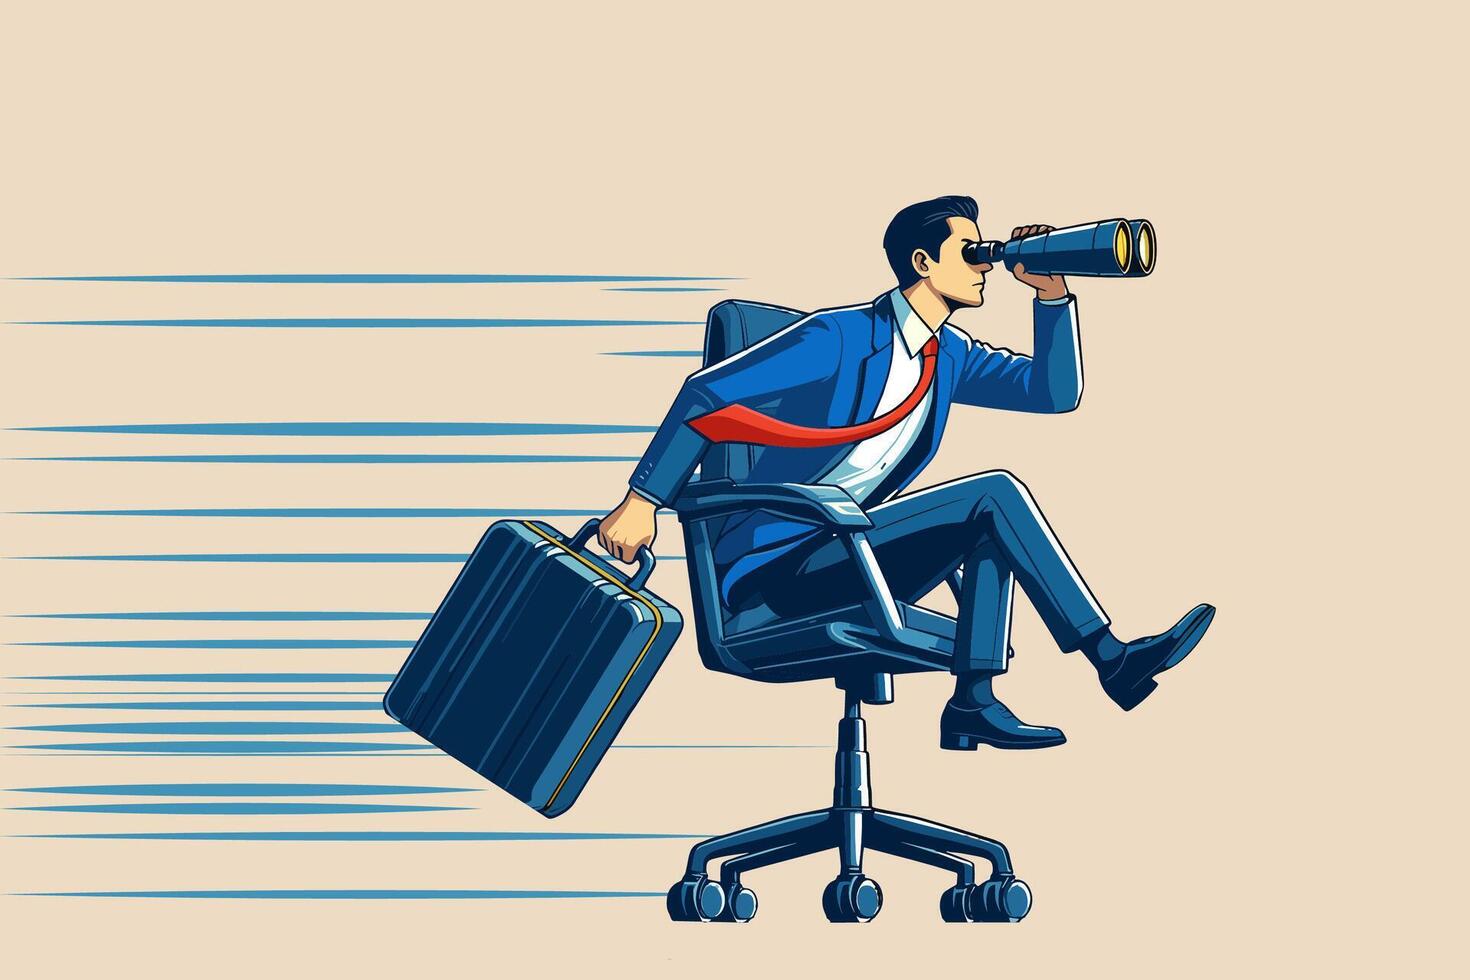 Career future, new job opportunity or visionary to success in work concept, businessman riding office chair using telescope to see future and the way forward vector